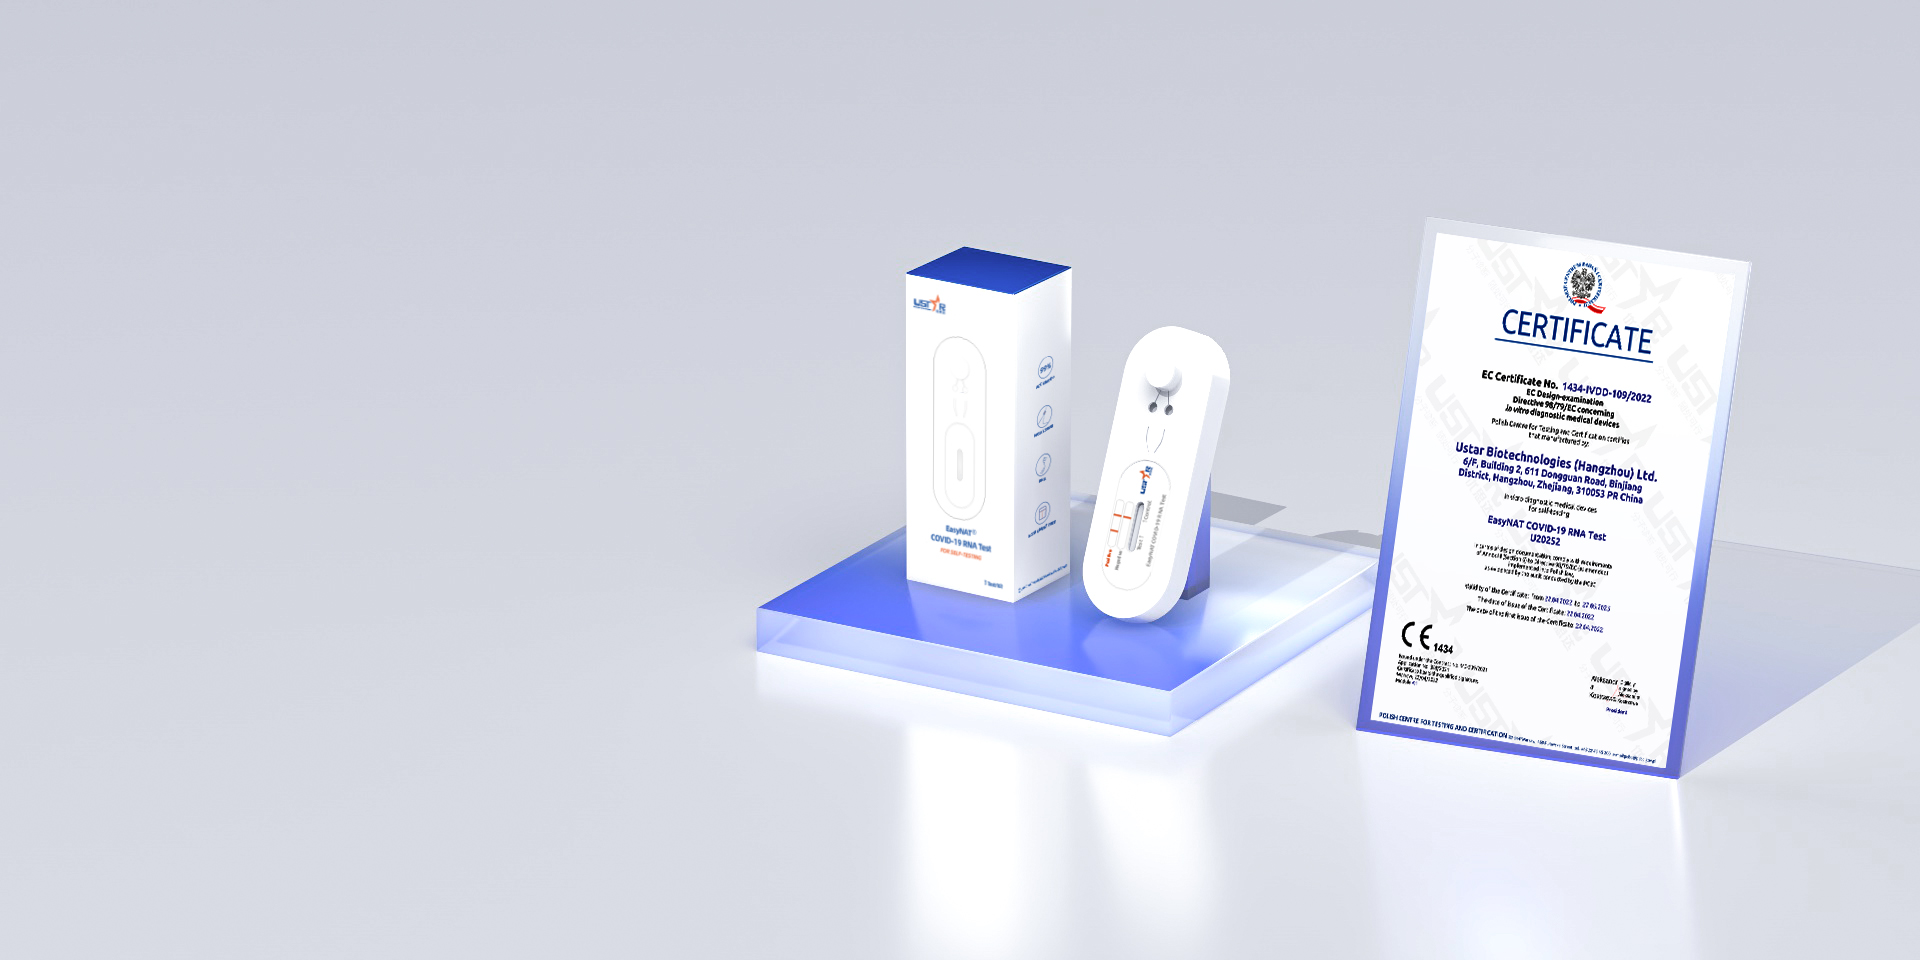 First EU CE-Approved Nucleic Acid Self Test for COVID-19